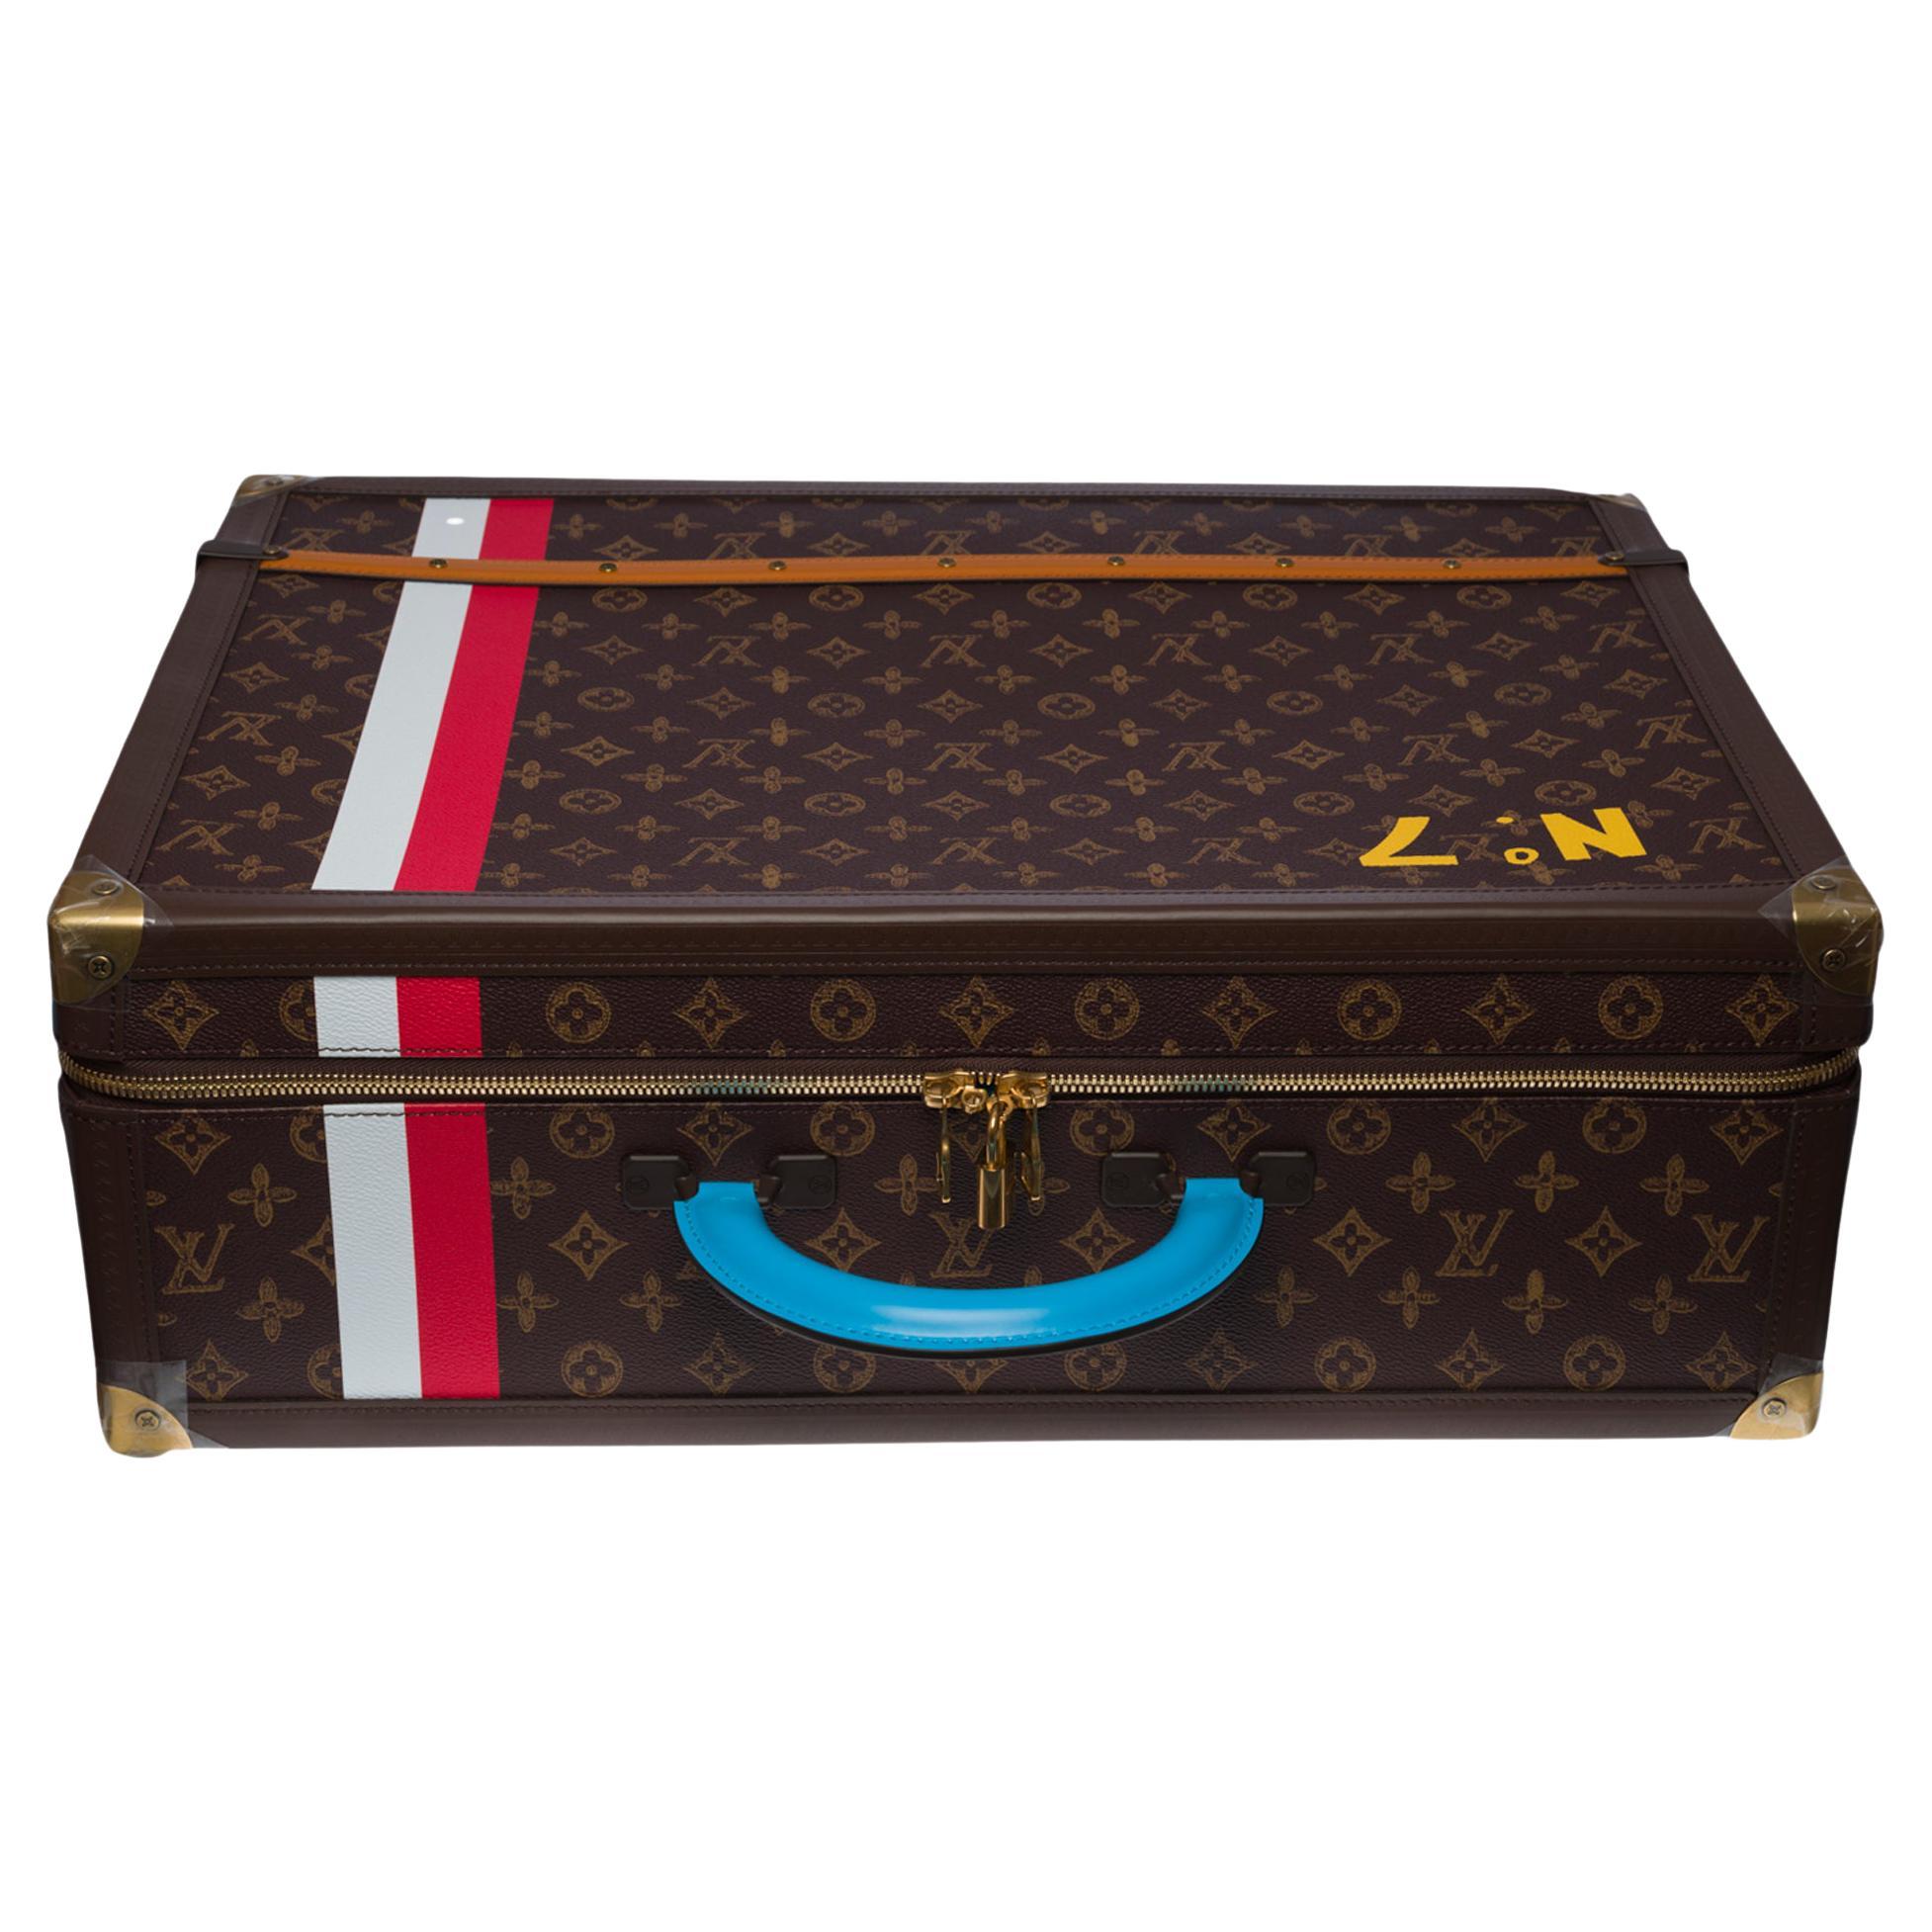 Ultra Rare - Unique Piece- Virgil Abloh Spring-Summer 2022 Collection N° 7 for Louis Vuitton

This Soft Trunk Alzer 55 case offers a contemporary reissue of the iconic eponymous model of Louis Vuitton. Historical details of the House sublimate the